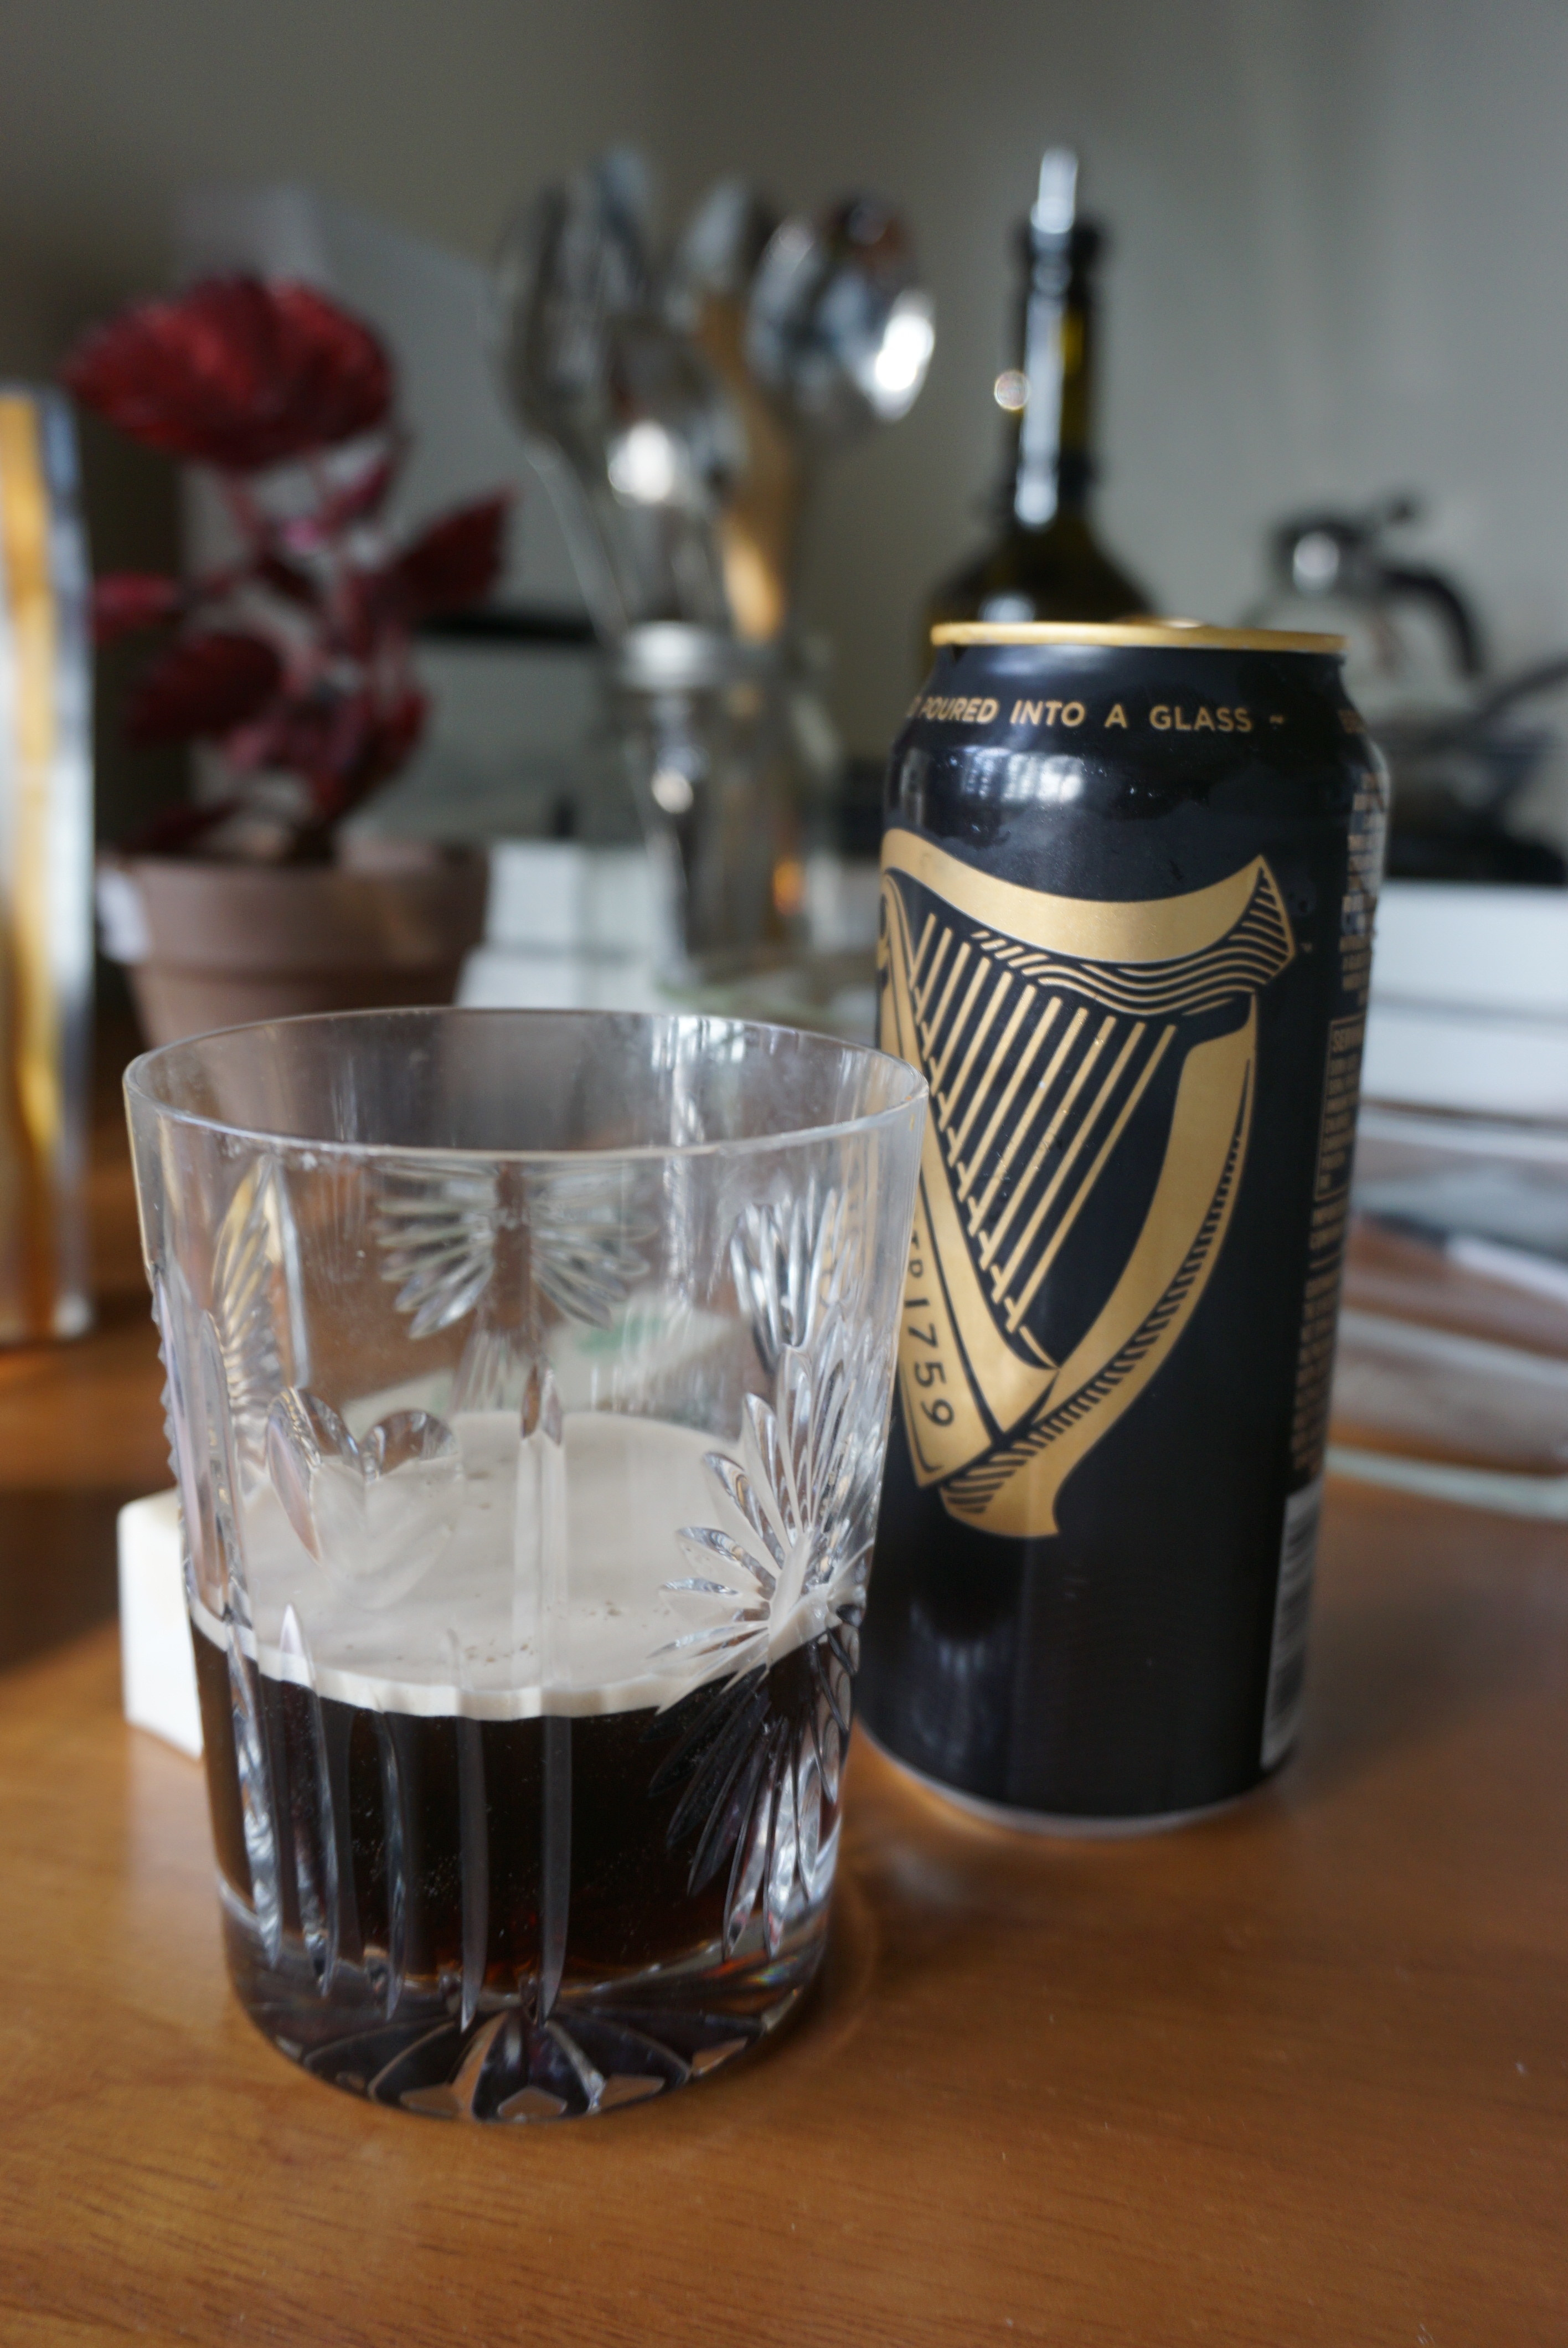 Guinness beer in a glass next to the can